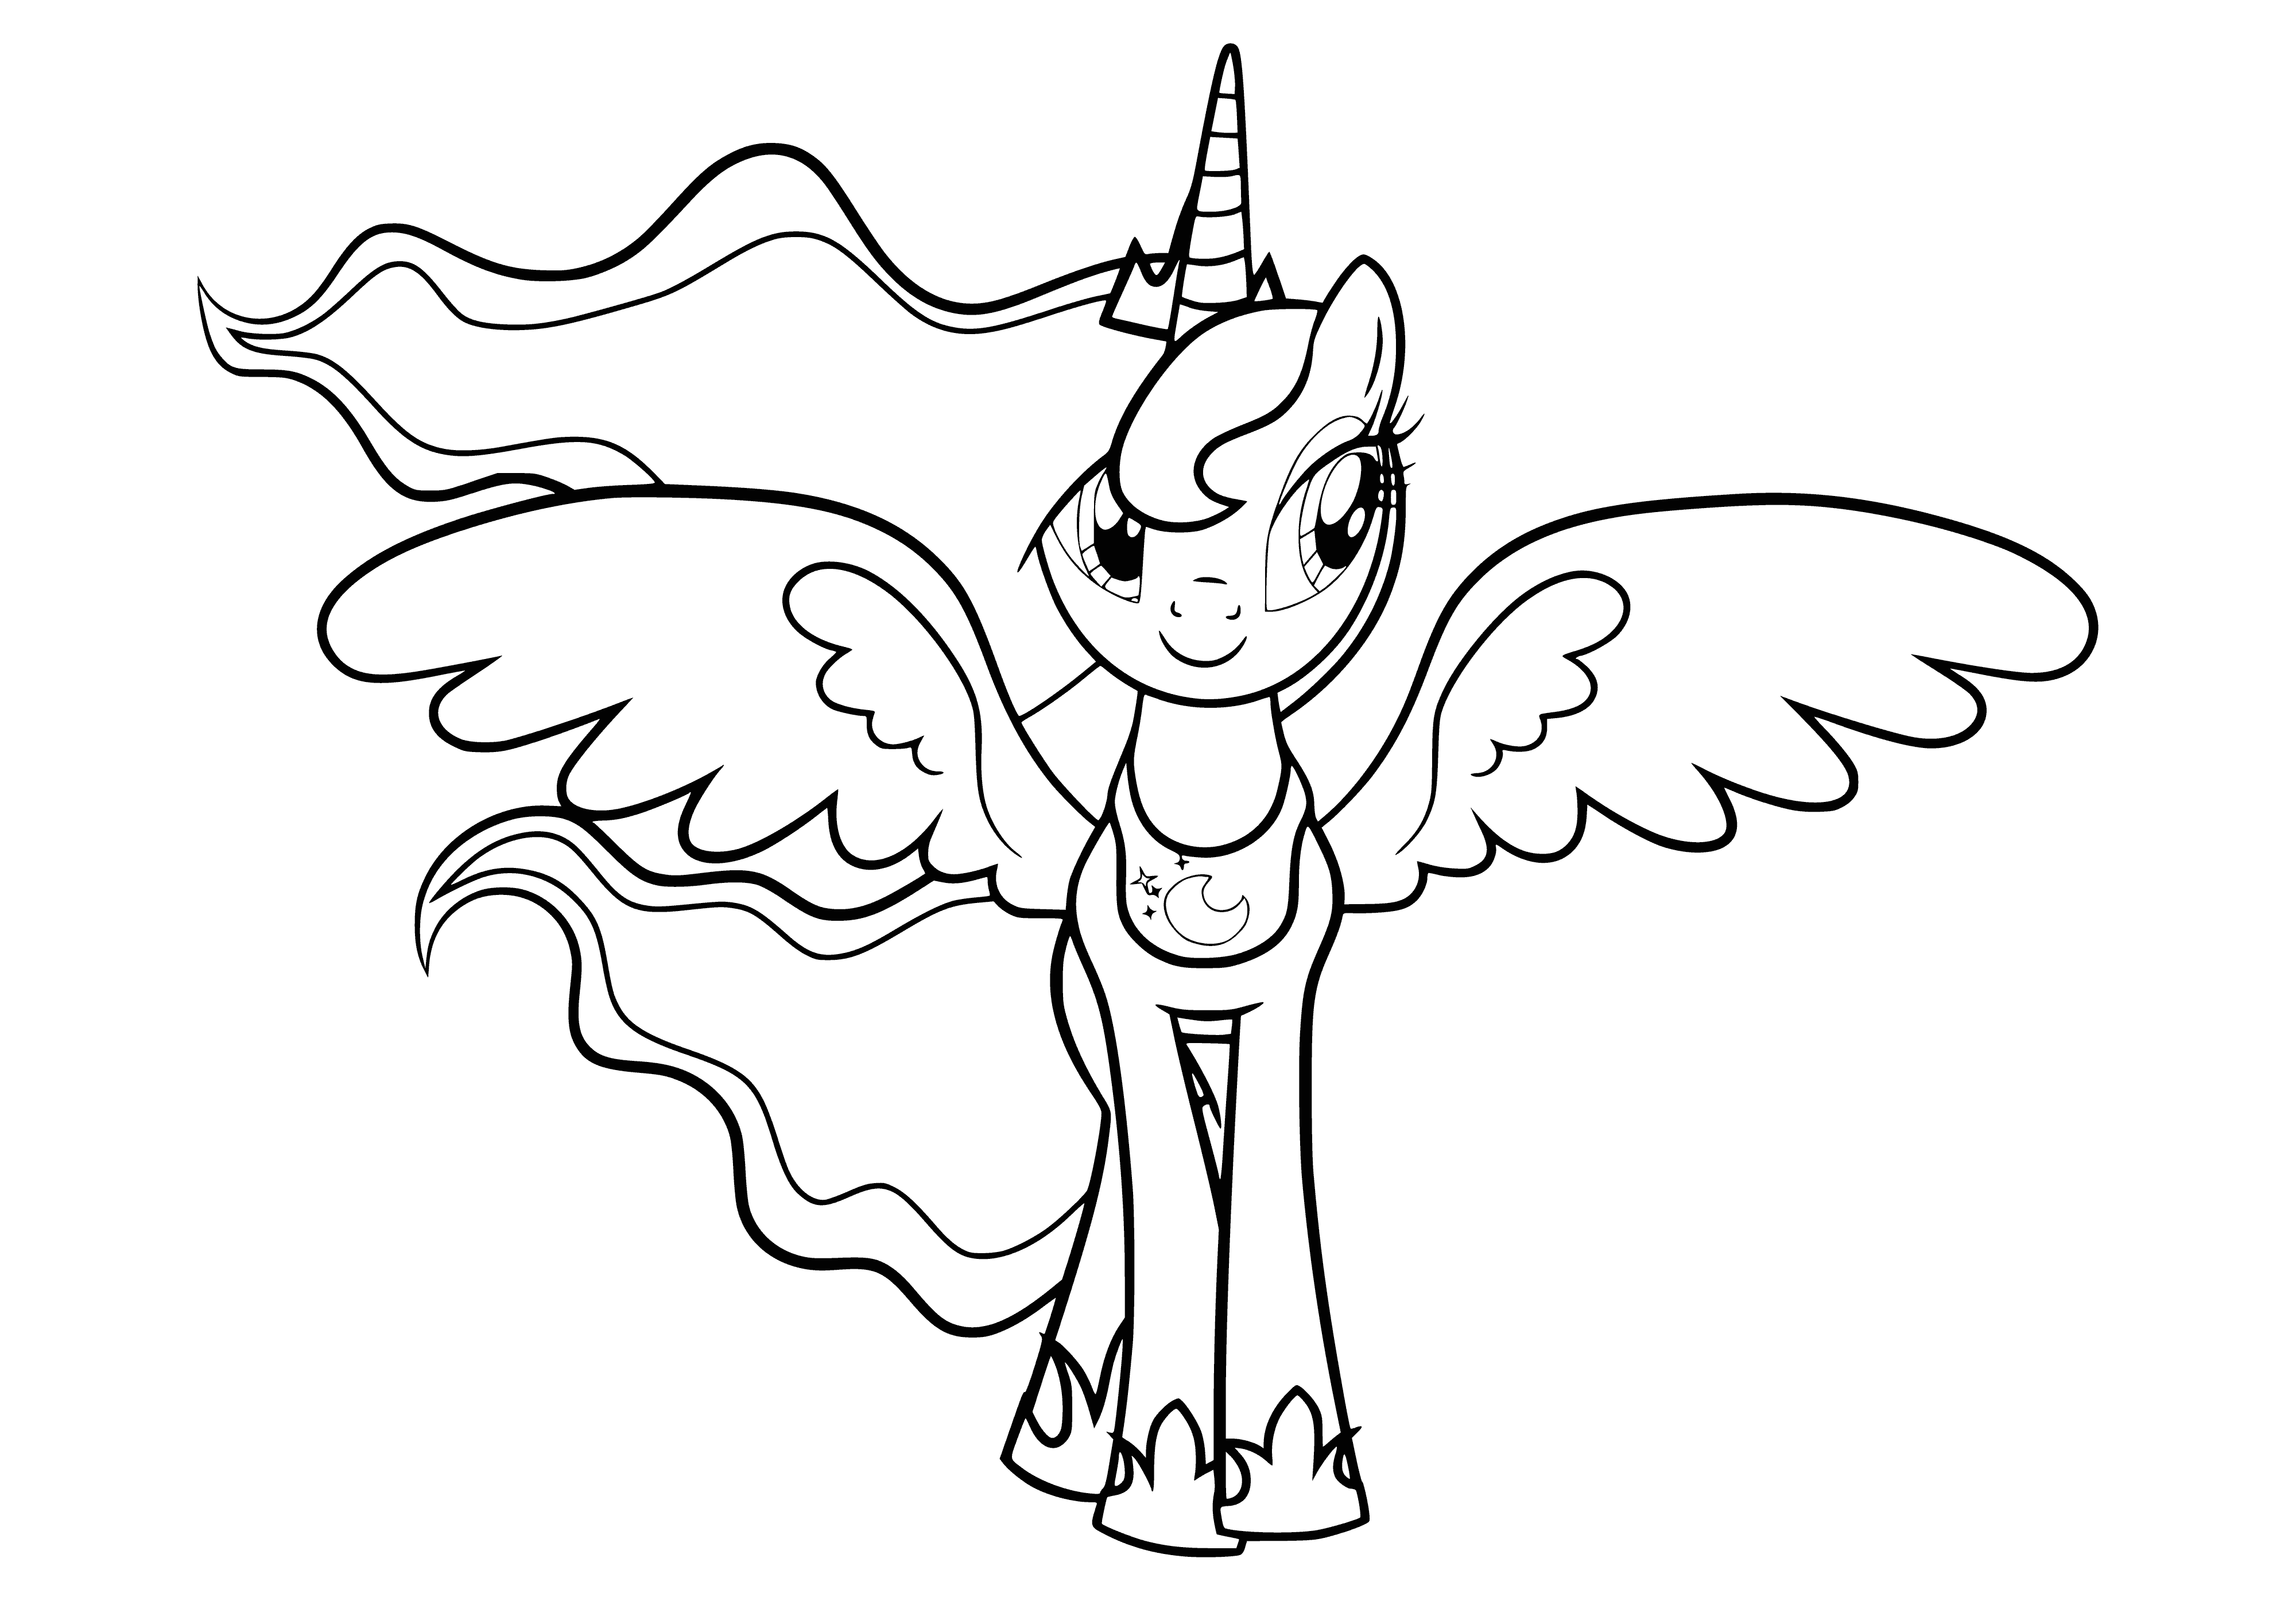 coloring page: Princess Luna, regal & serene, has silver & blue mane/tail, deep blue body & shining crescent moon. She's ready to take on the night!